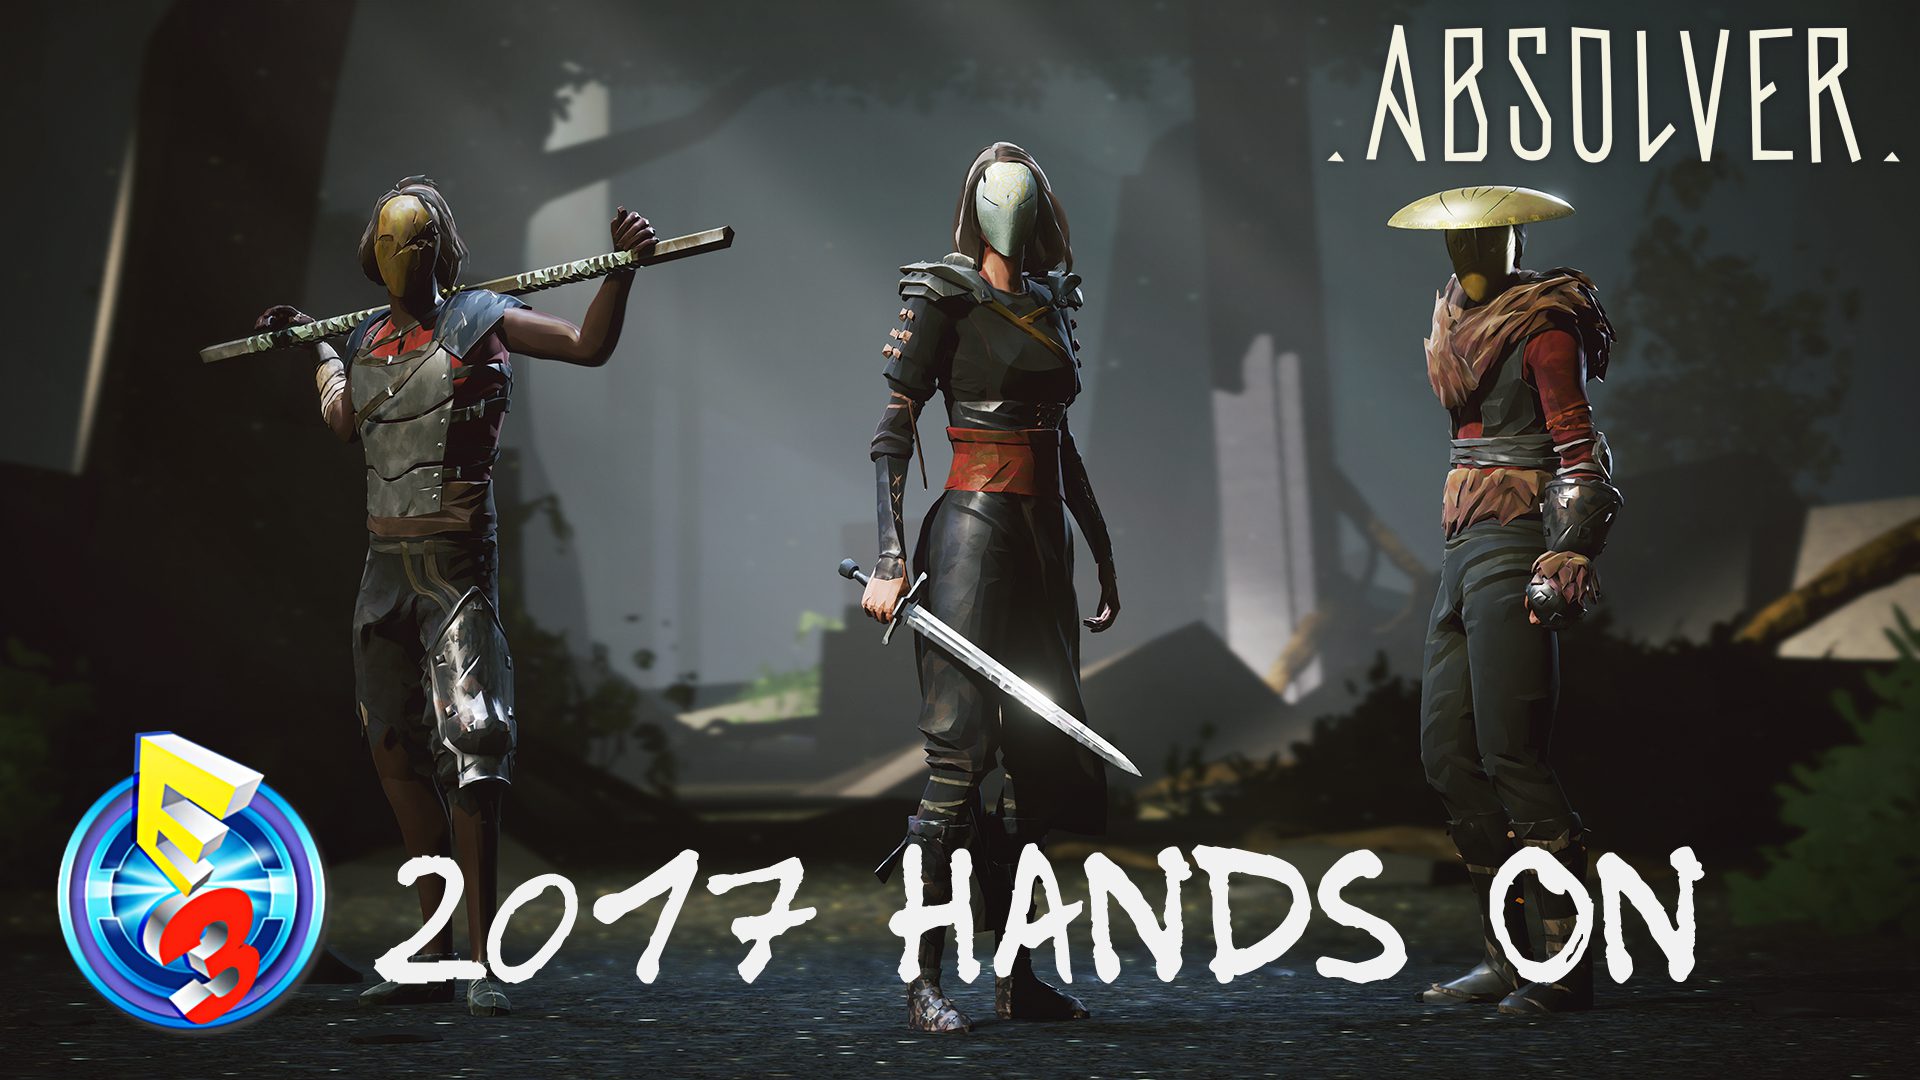 E3 2017: ‘Absolver’ Hands-On Impressions